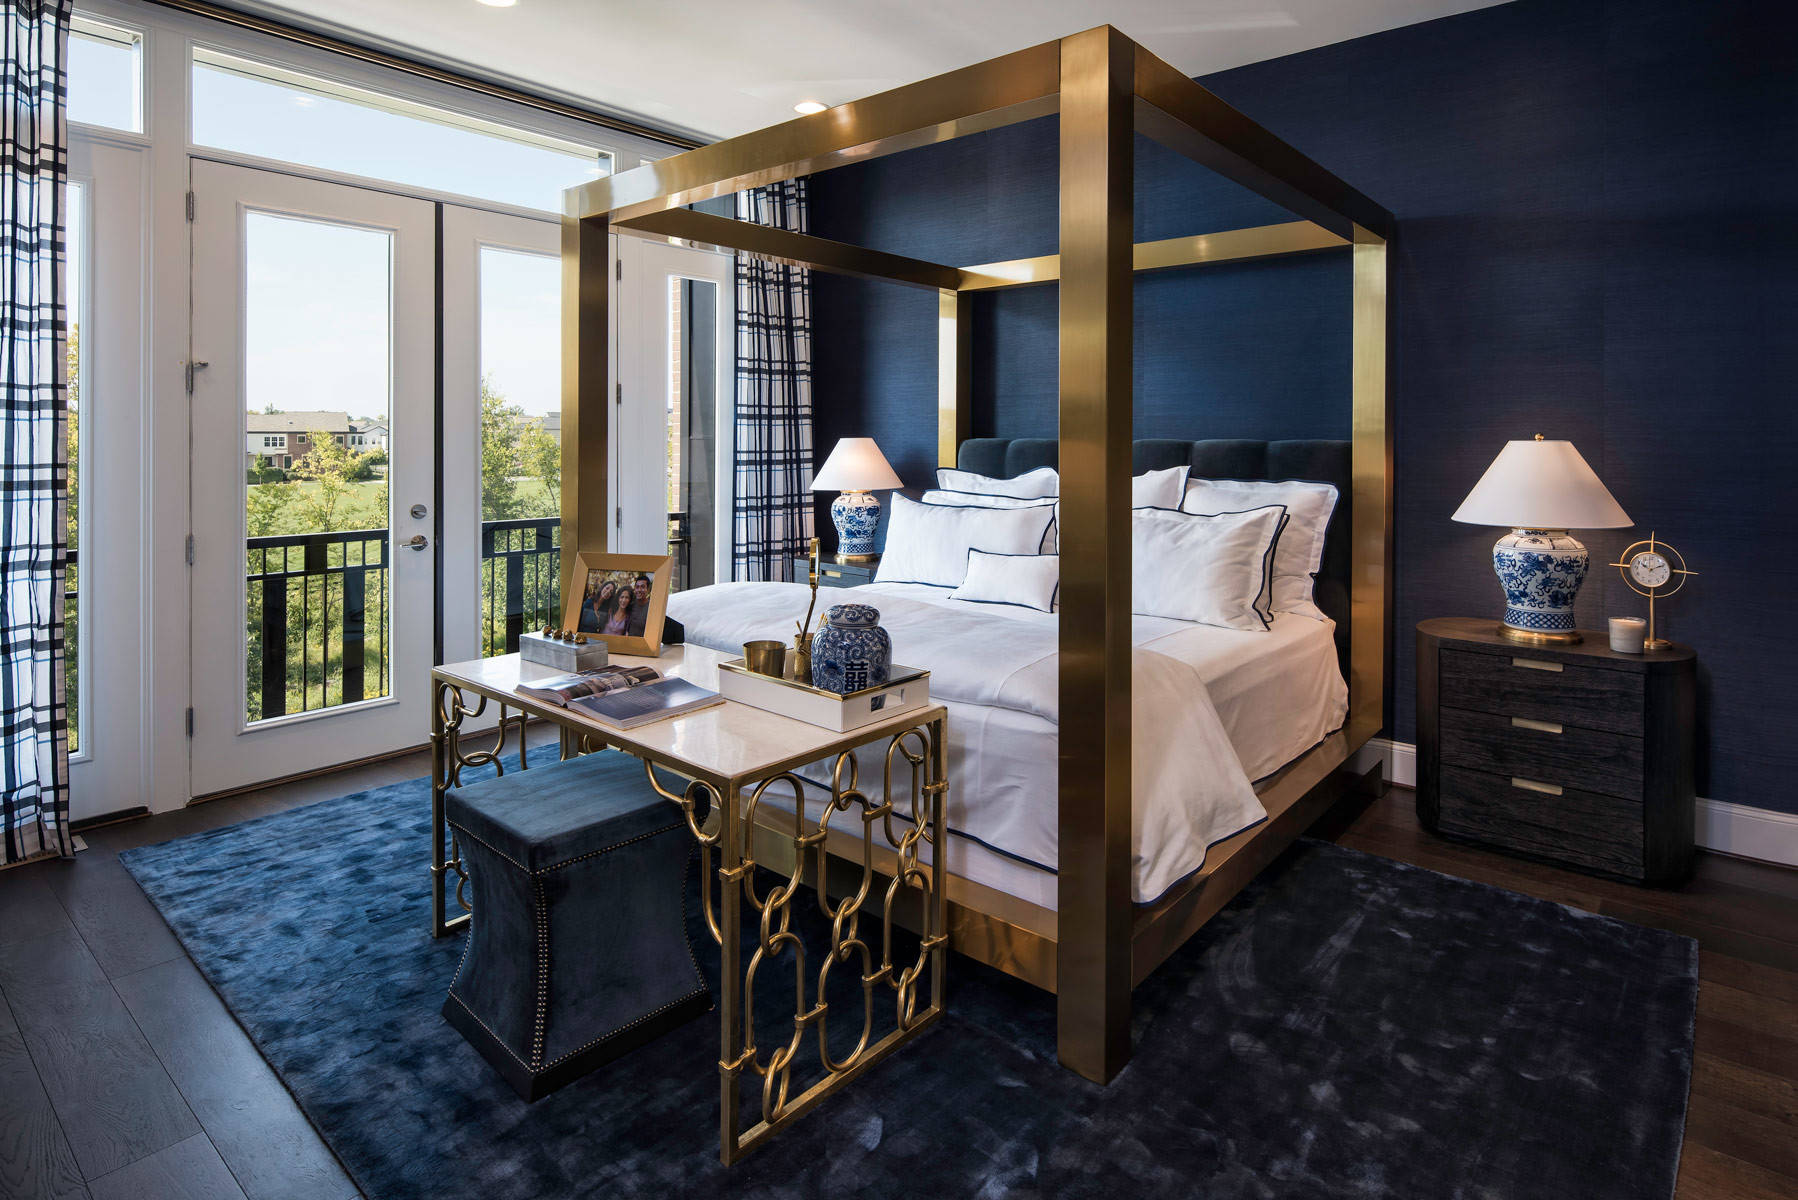 75 Master Bedroom With Blue Walls Ideas You'Ll Love - August, 2023 | Houzz